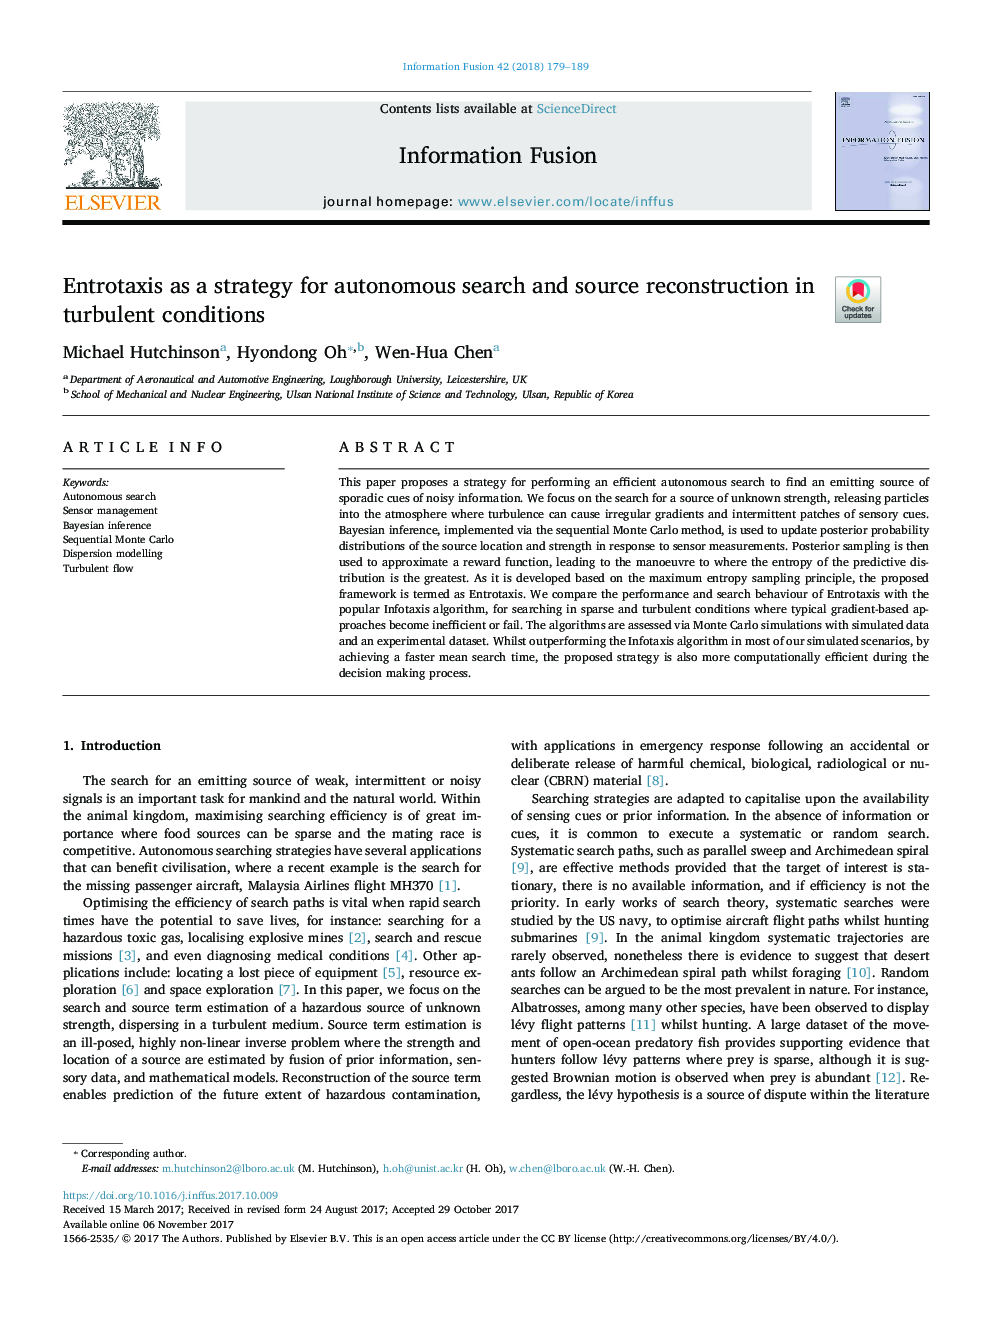 Entrotaxis as a strategy for autonomous search and source reconstruction in turbulent conditions